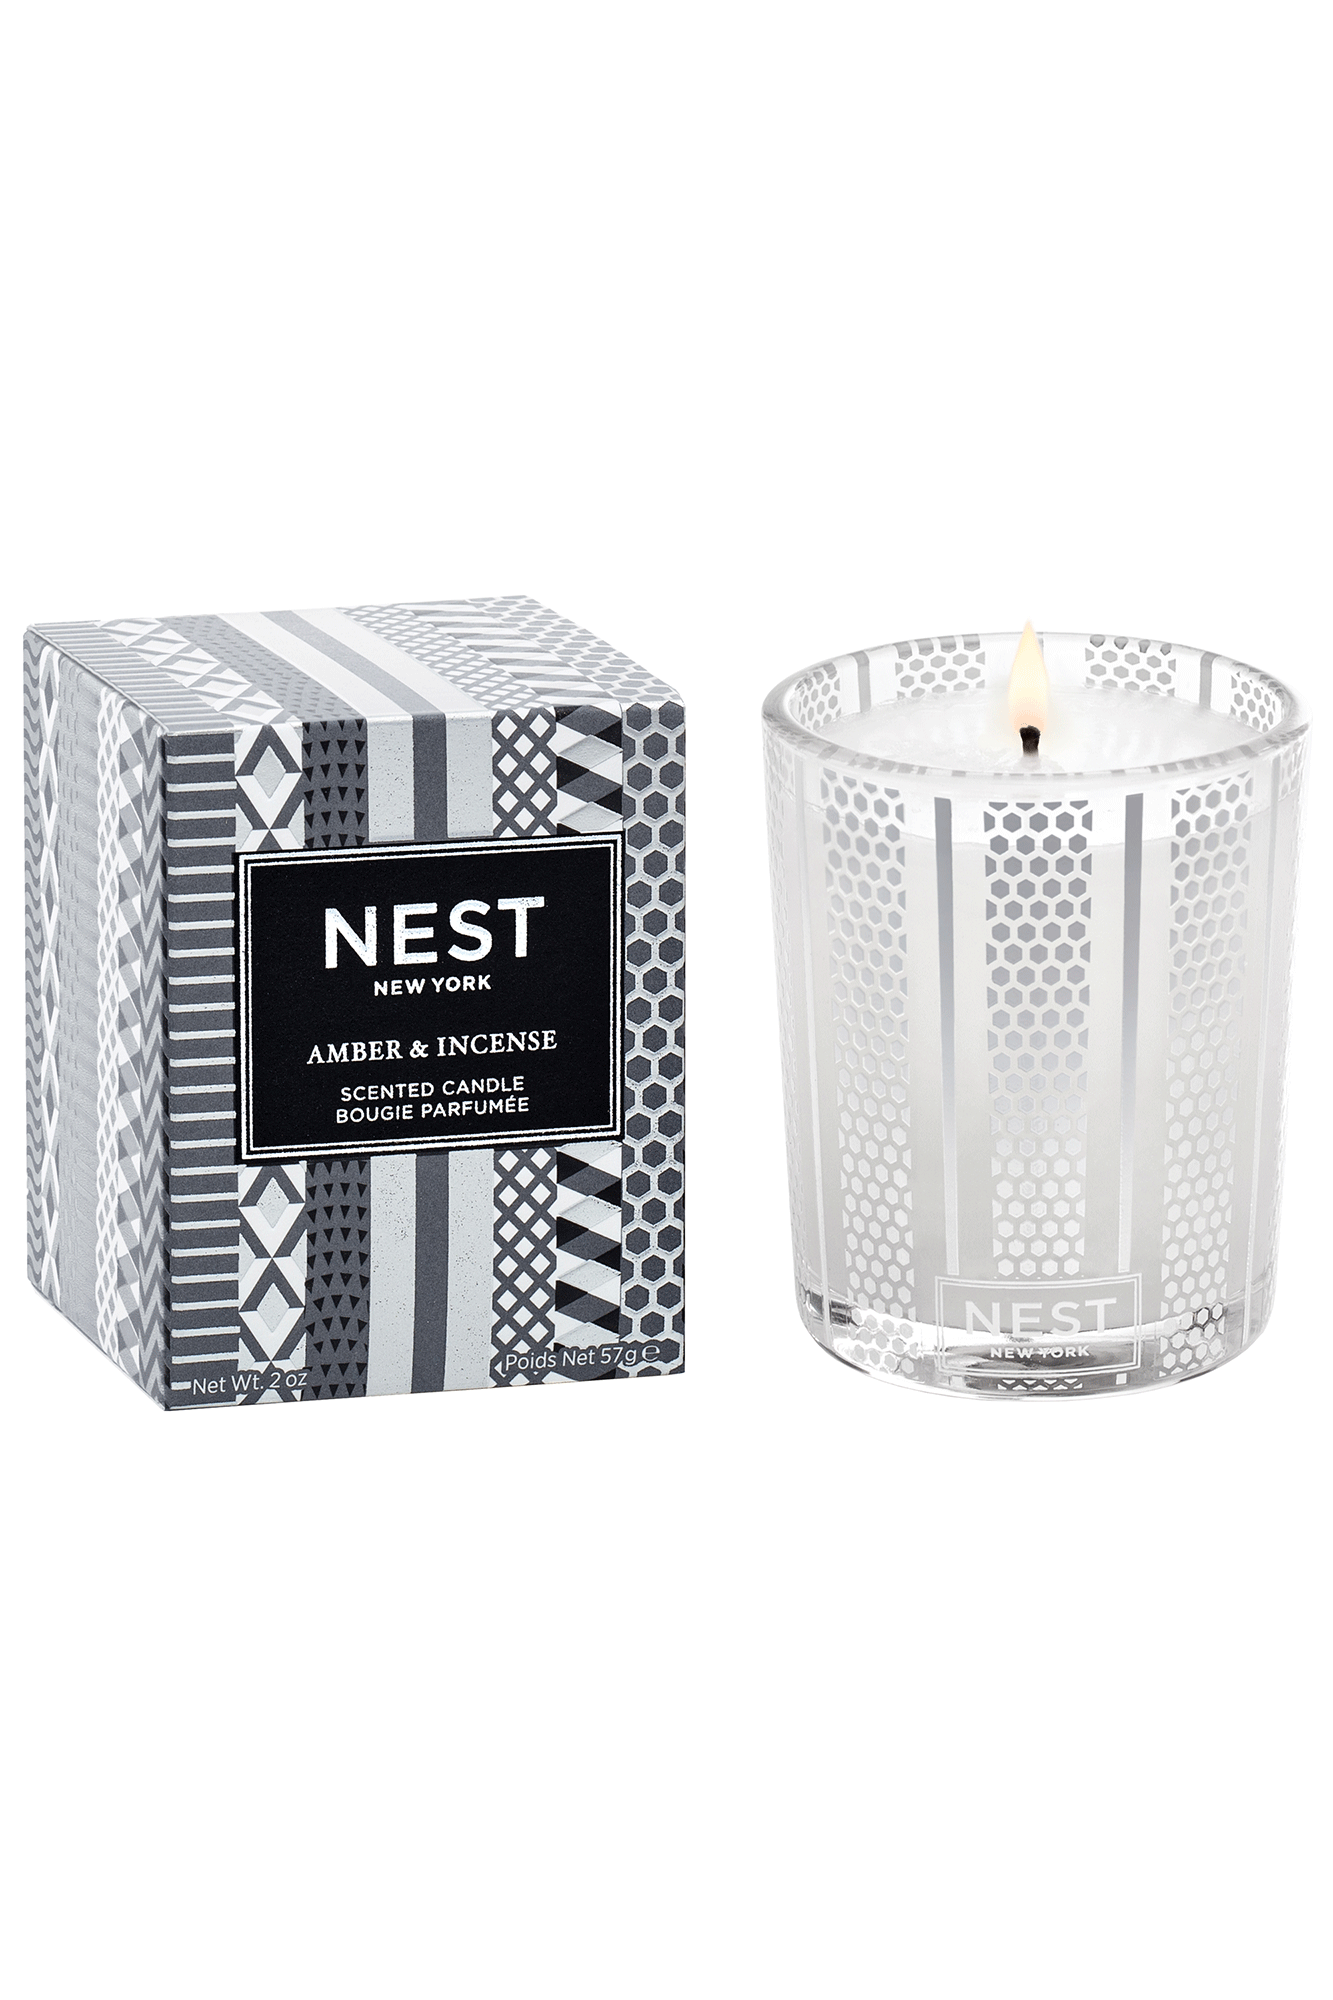 This Amber & Incense Votive Candle from Nest is perfect for experiencing the richness of amber, frankincense, and cedar. Its blend of complex fragrances creates a tranquil atmosphere, making it perfect for peace and relaxation.